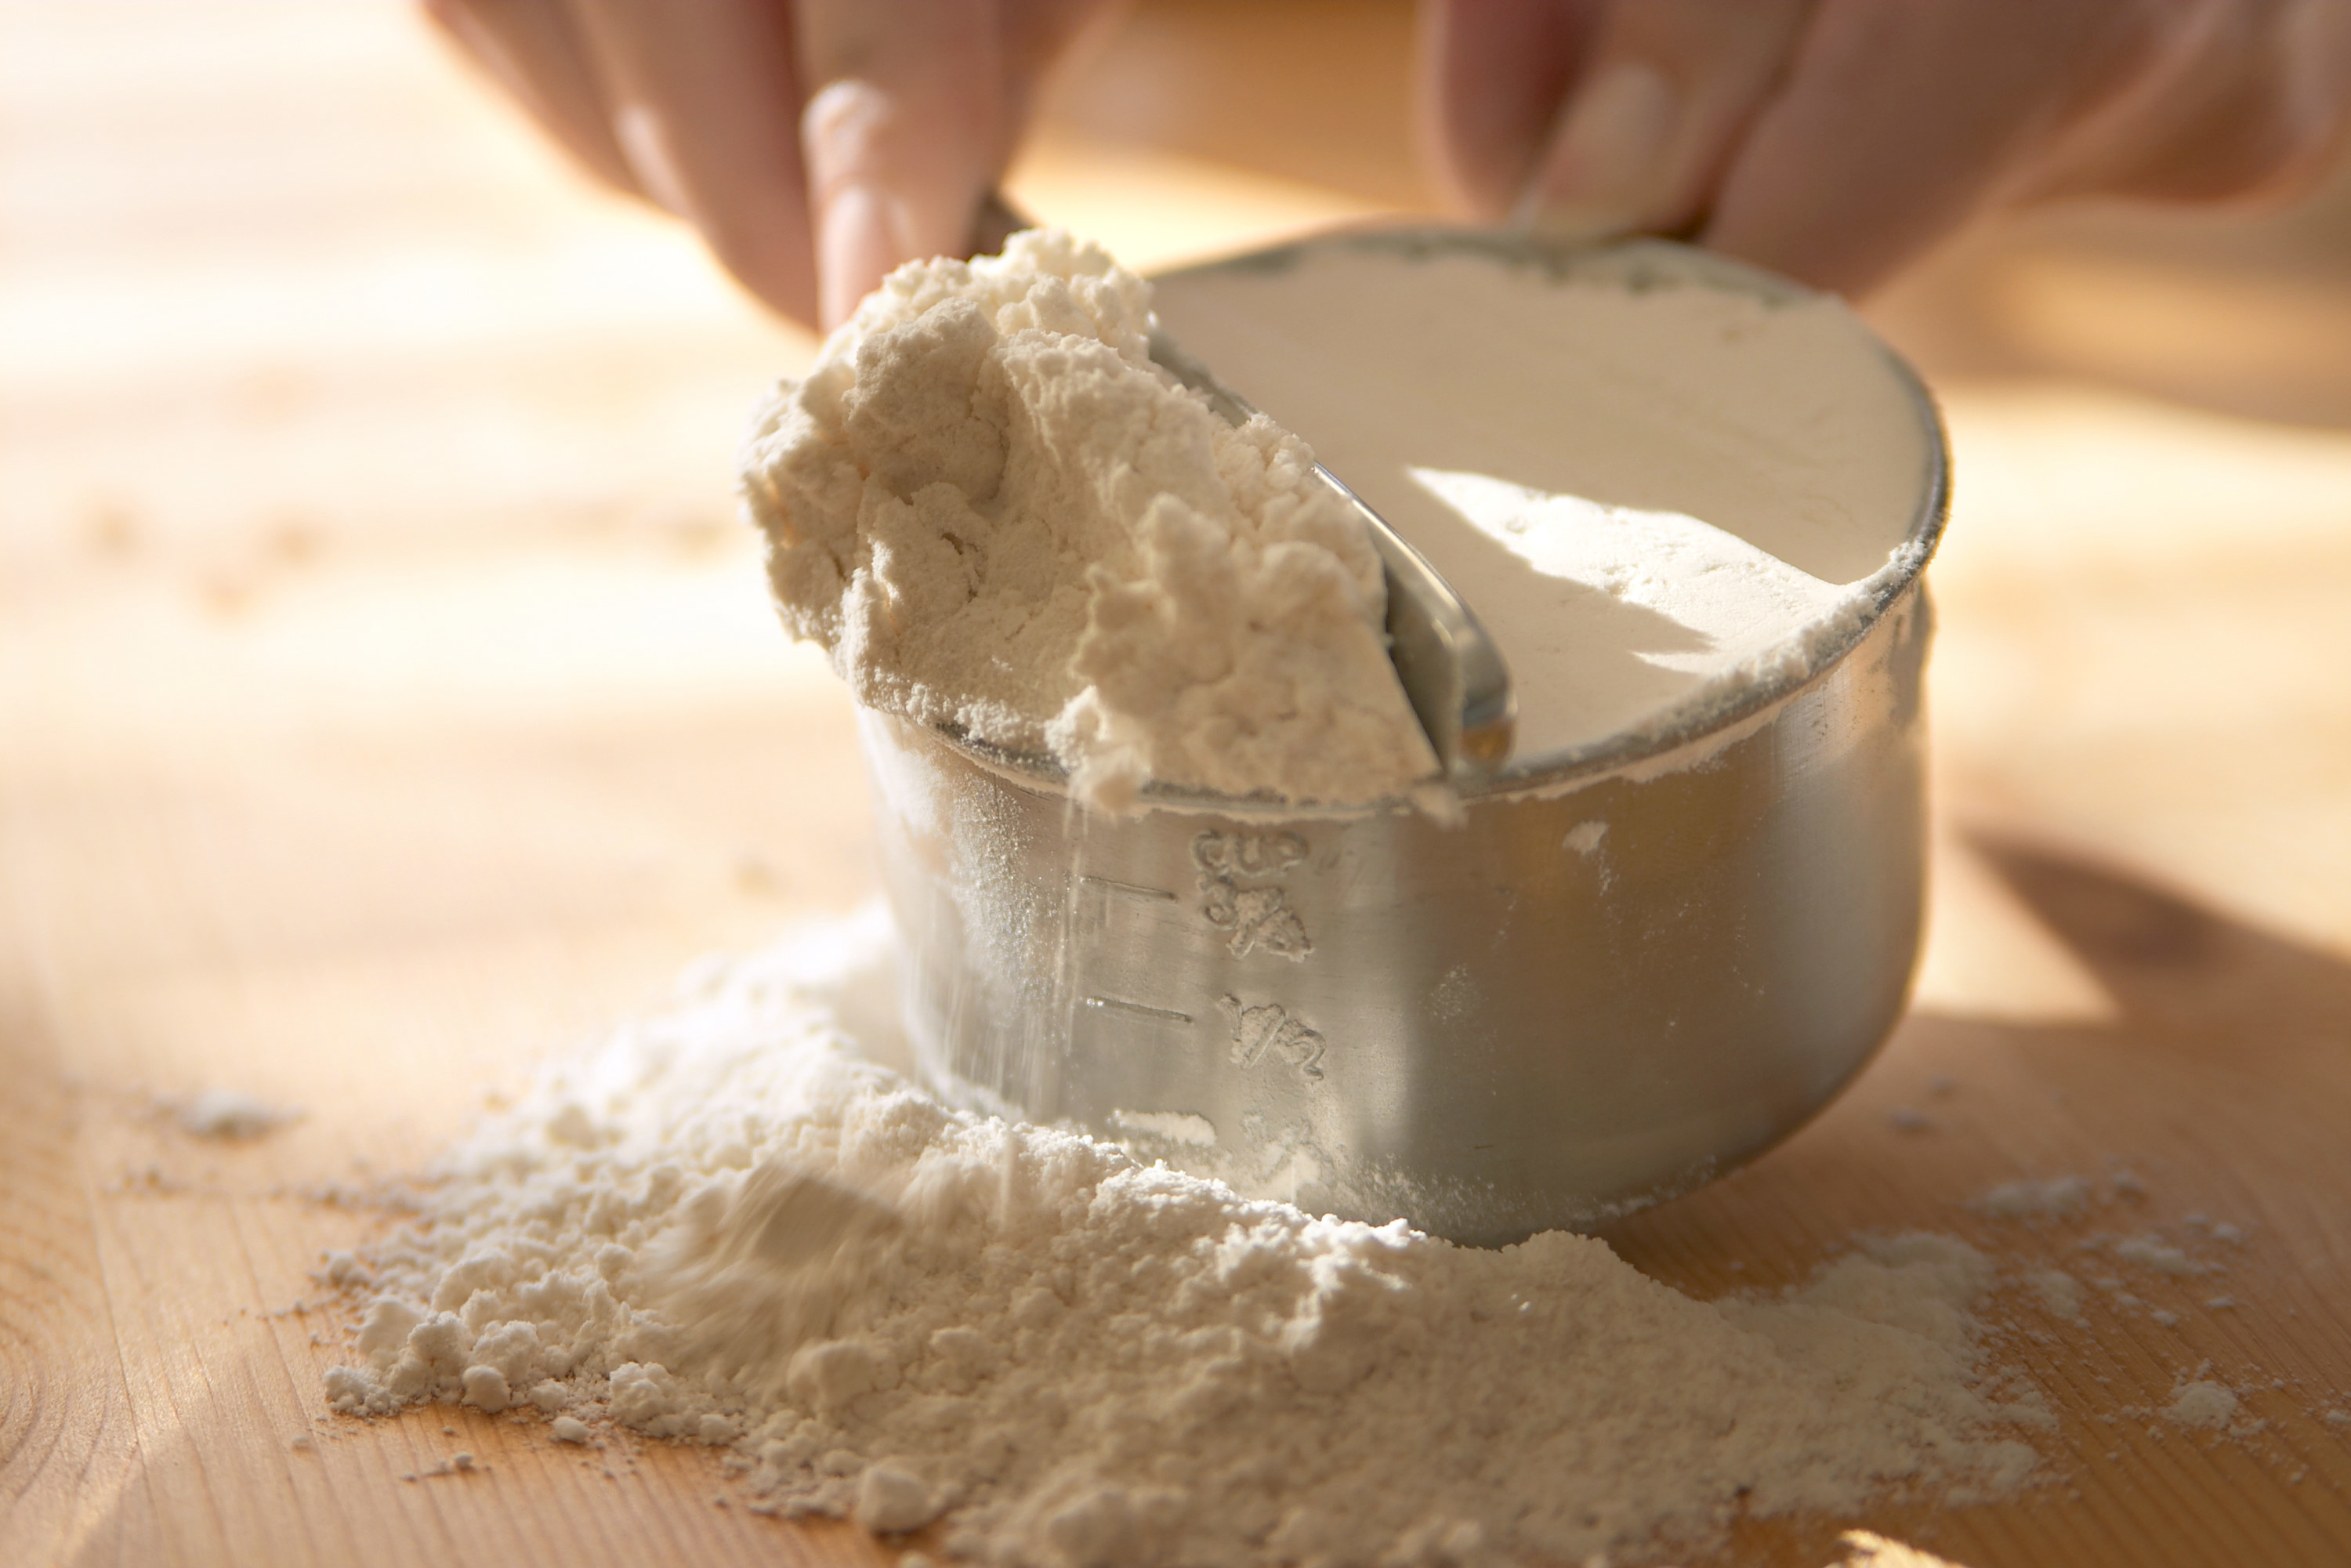 A person leveling off flour into a measuring cup